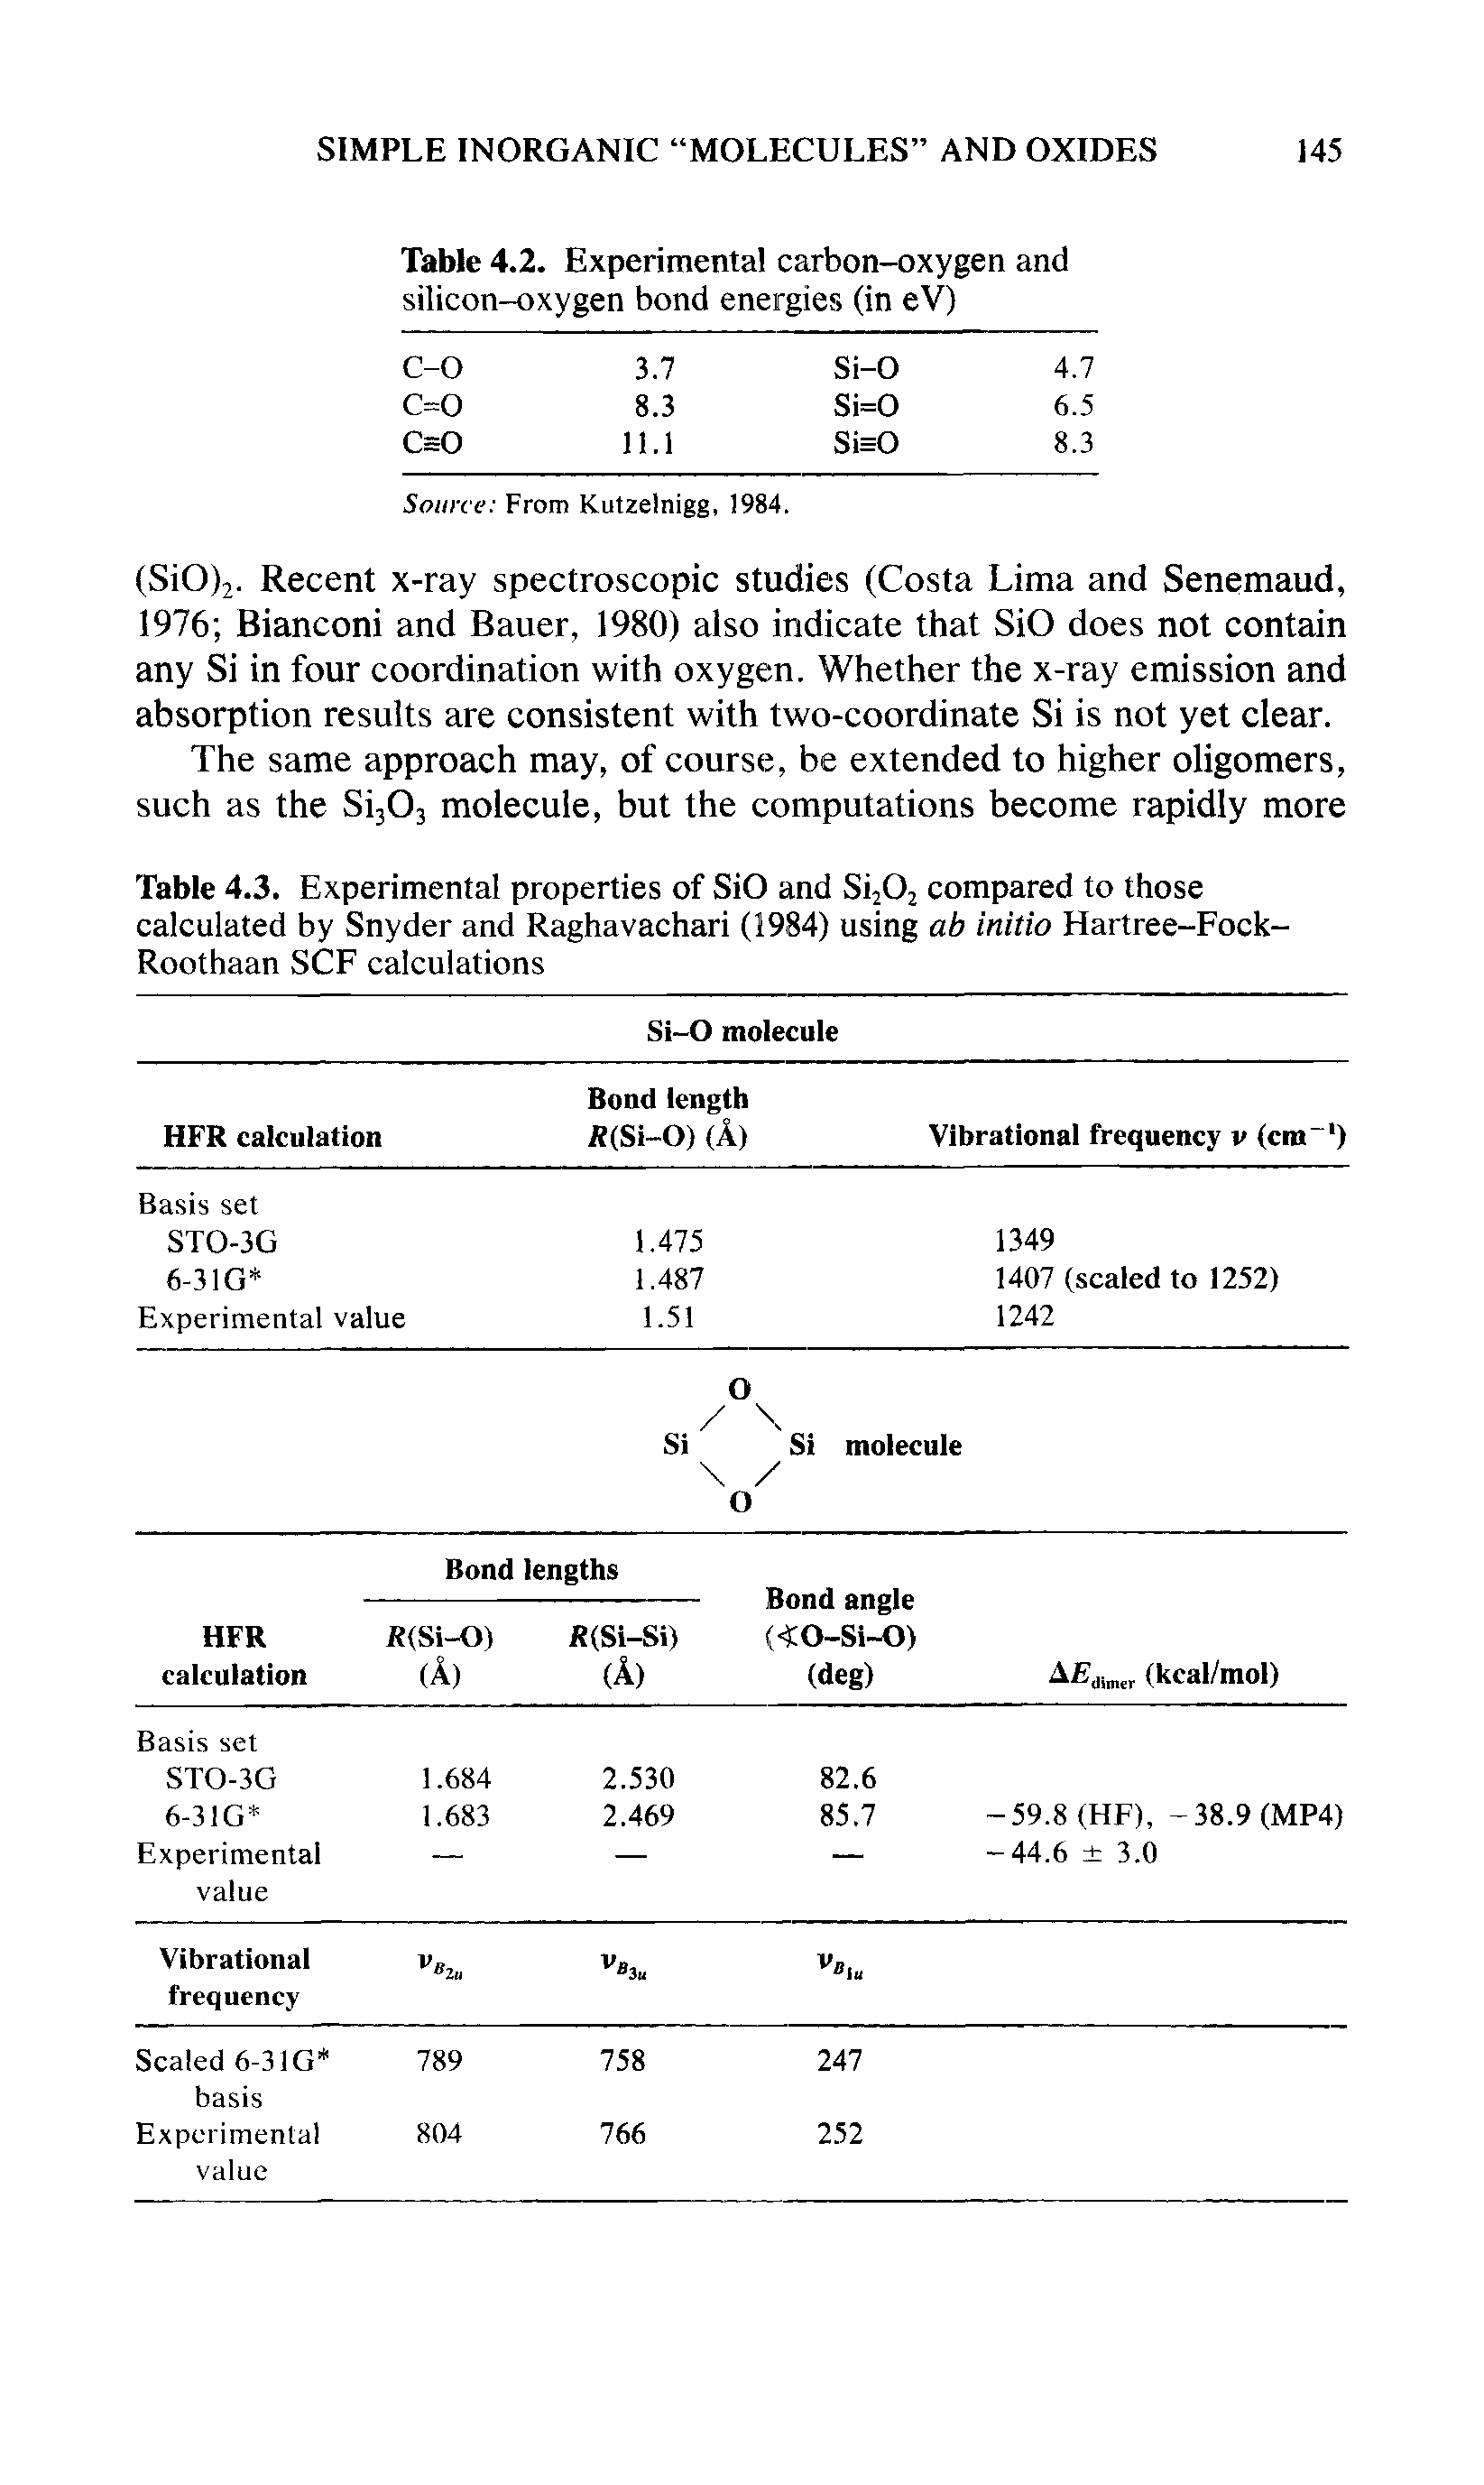 Table 4.3. Experimental properties of SiO and Si Oj compared to those calculated by Snyder and Raghavachari (1984) using ab initio Hartree-Fock-Roothaan SCF calculations...